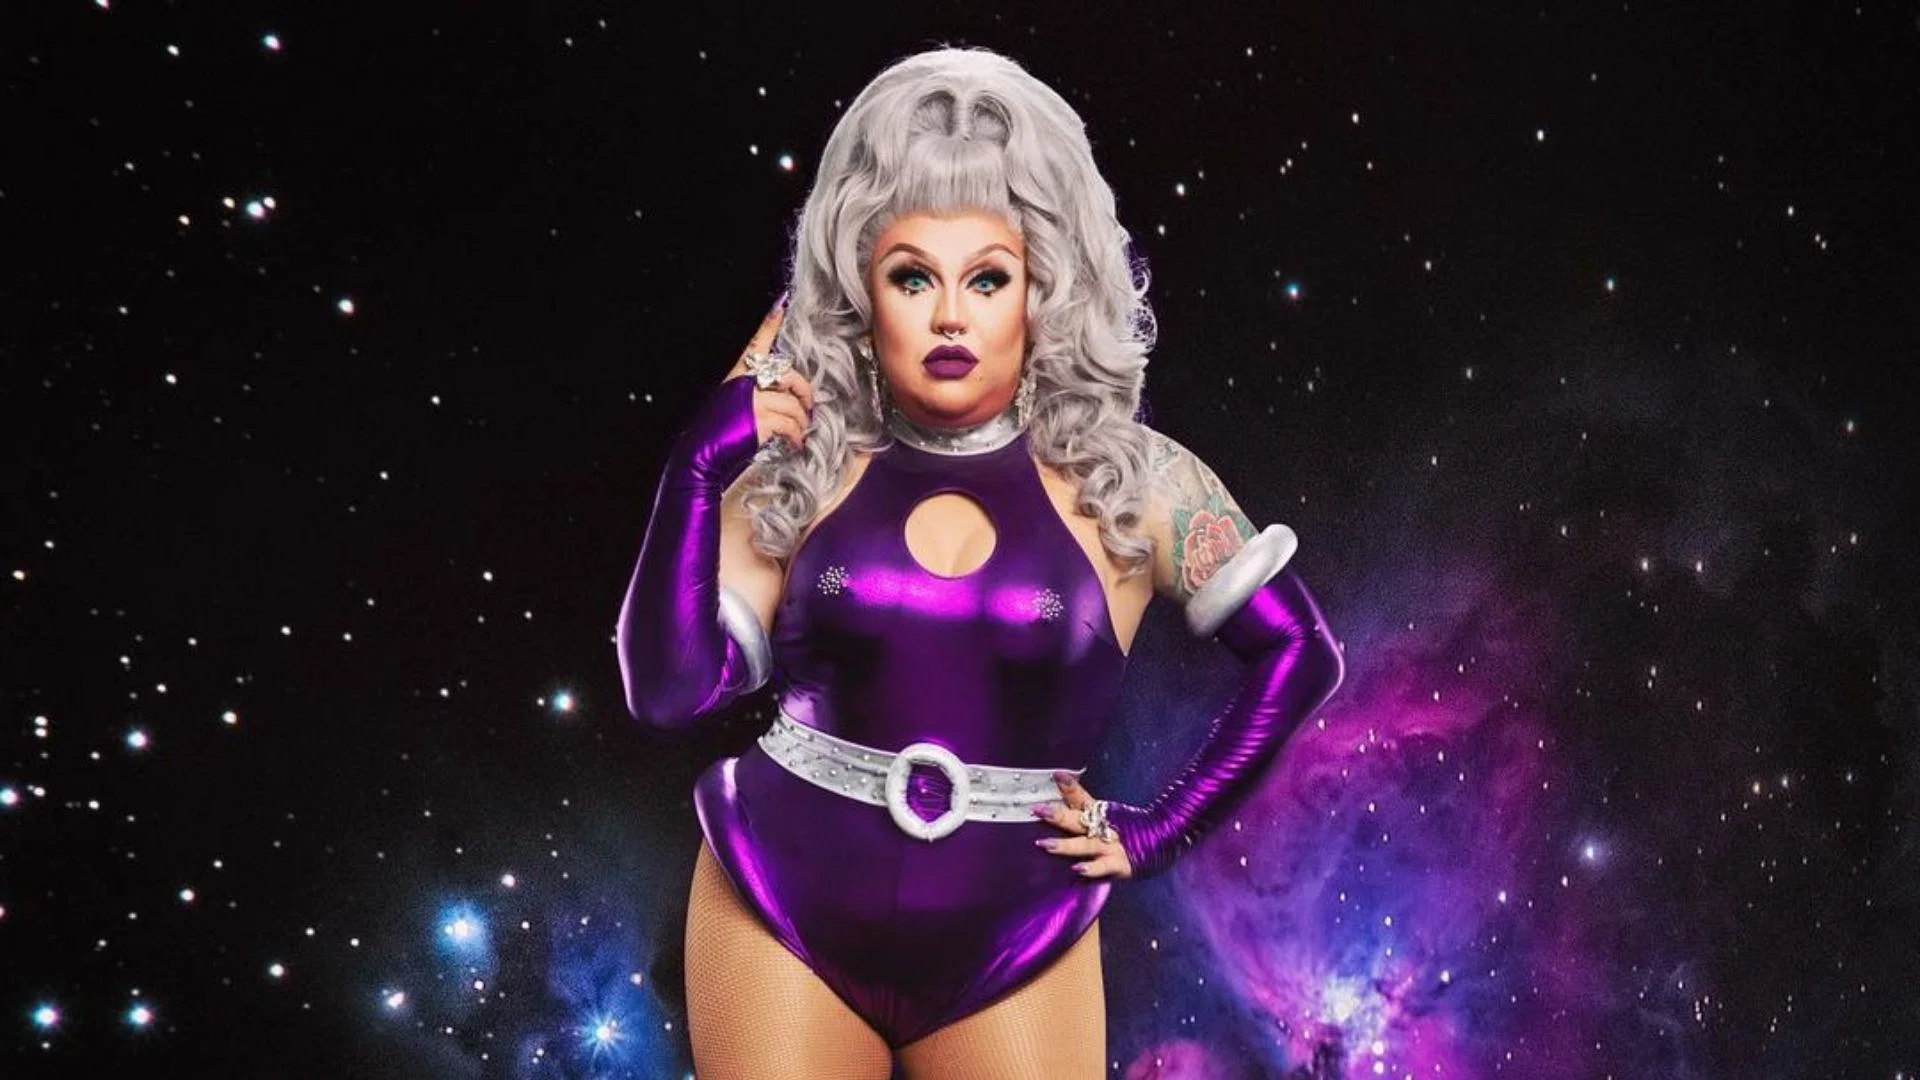 How was Molly Poppinz’s performance in season 2 of RuPaul's Drag Race Down Under